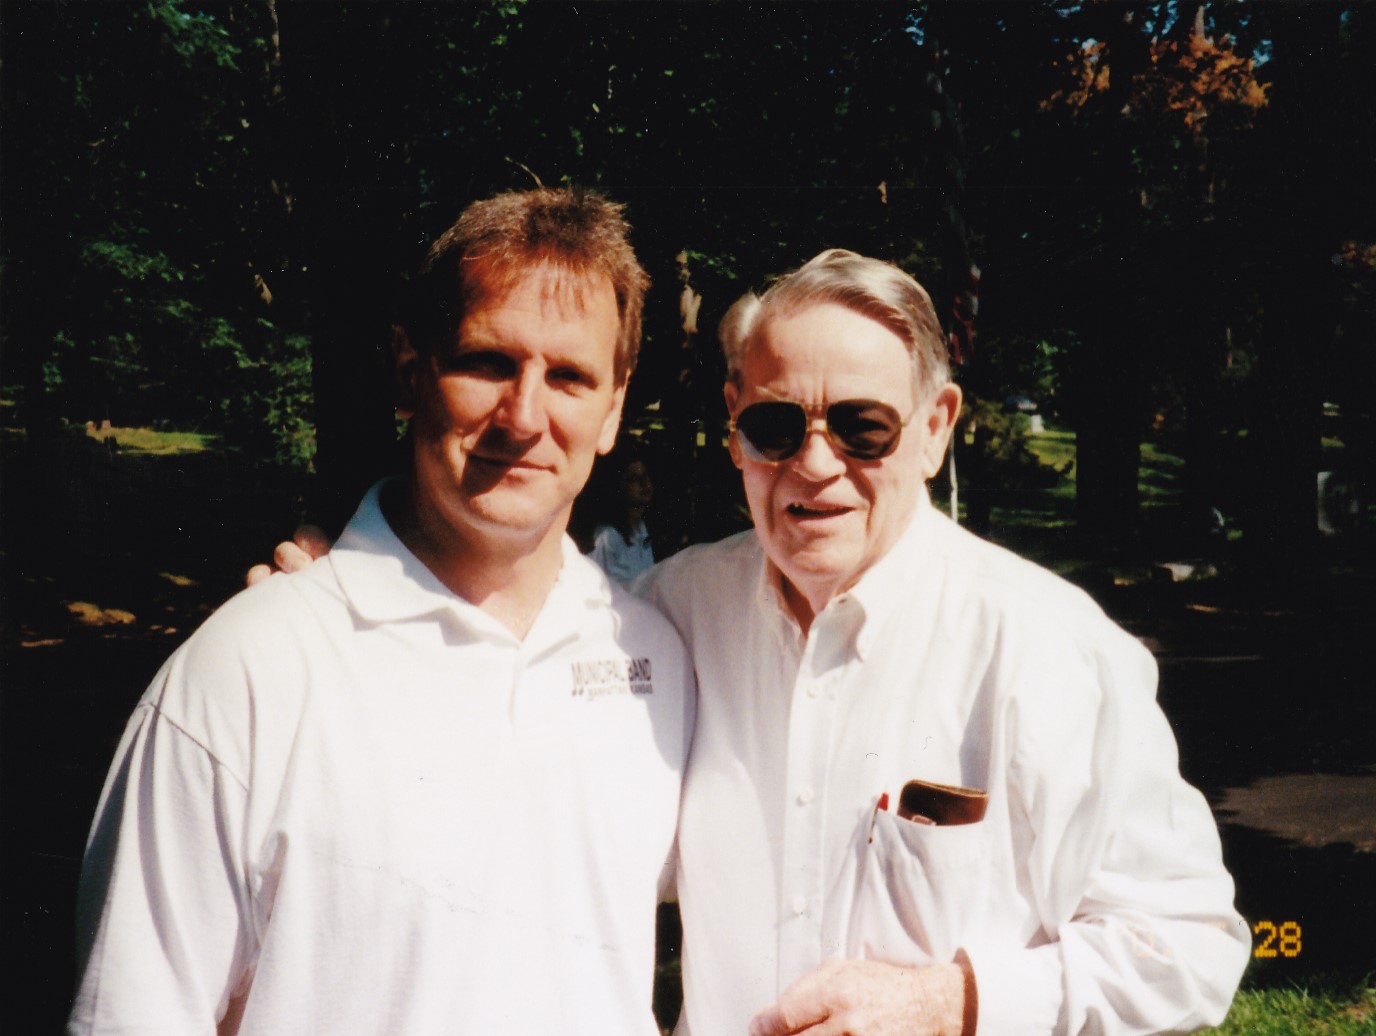 Dr. Frank Tracz with Larry Norvell